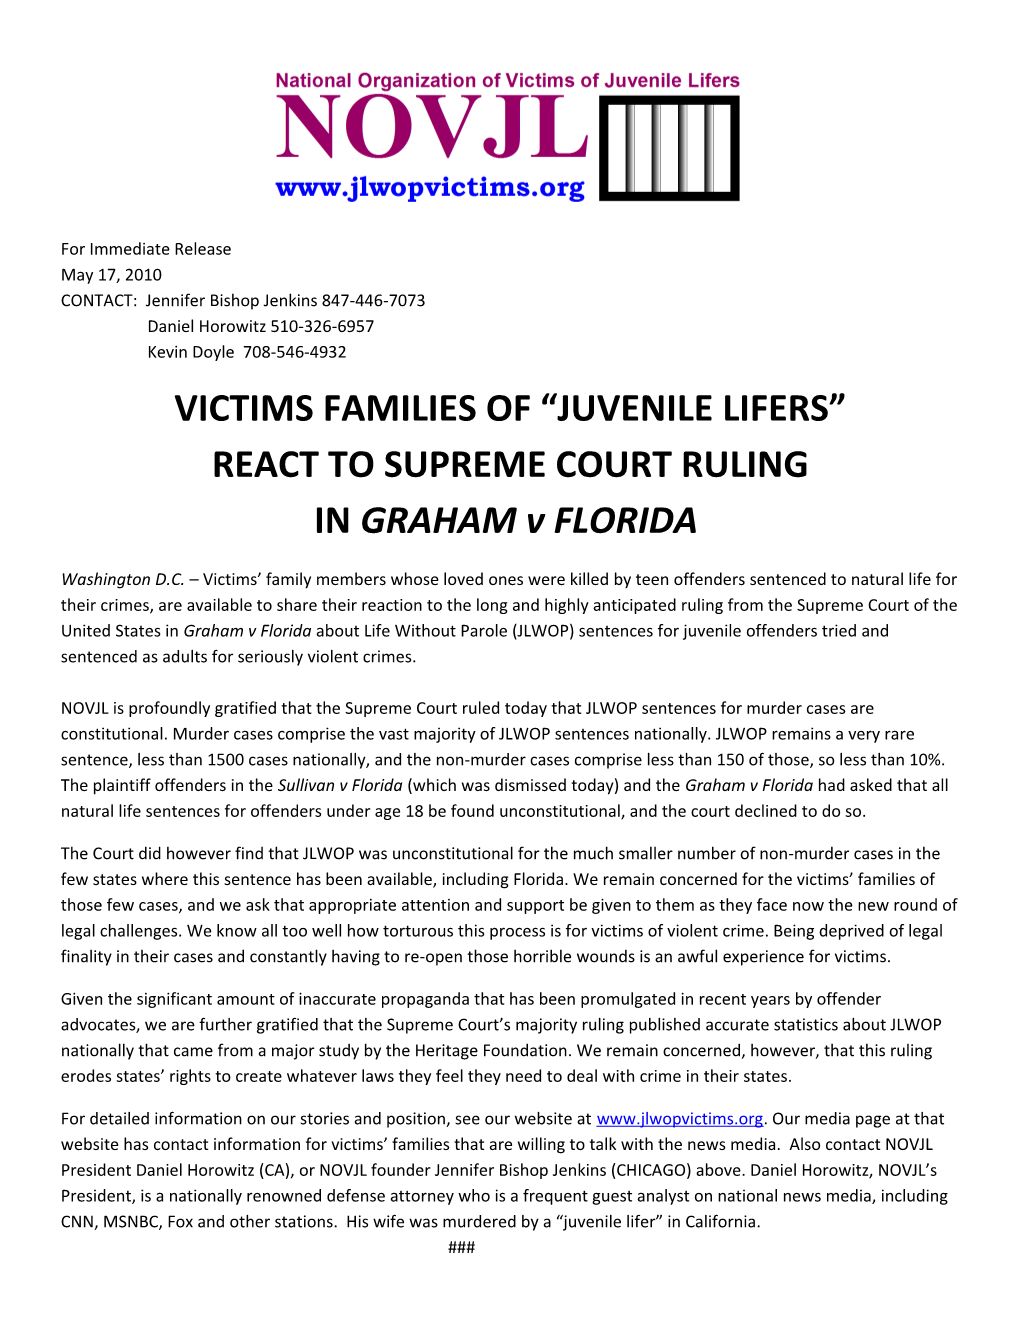 VICTIMS FAMILIES of JUVENILE LIFERS REACT to SUPREME COURT RULING in GRAHAM V FLORIDA